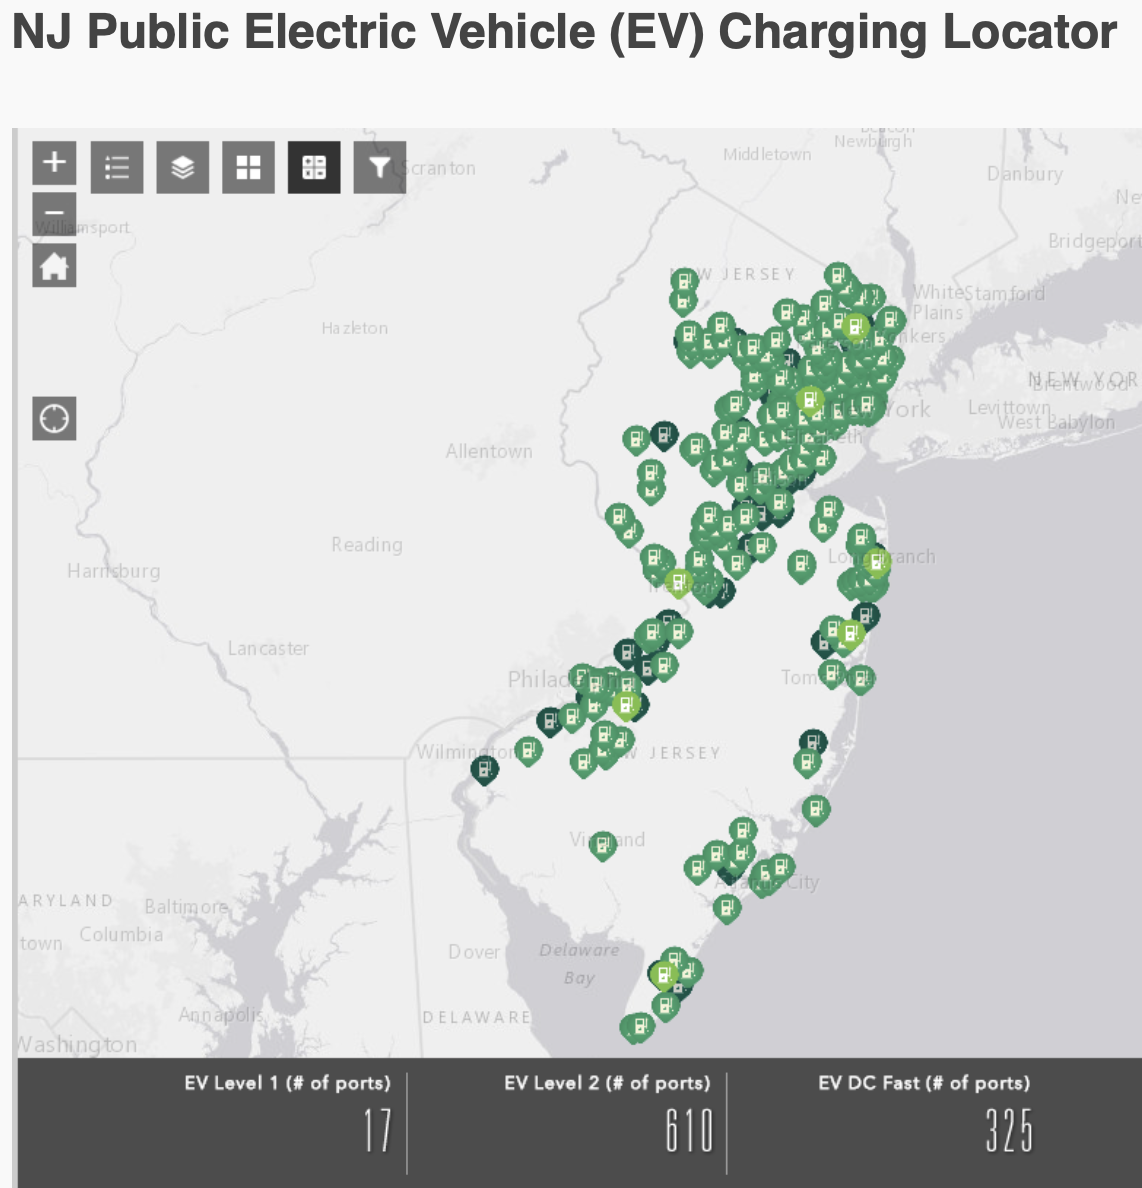 One aspect of NJ’s EV conversion plan is to develop a robust network of fast chargers, which is already underway. Source: NJDEP.